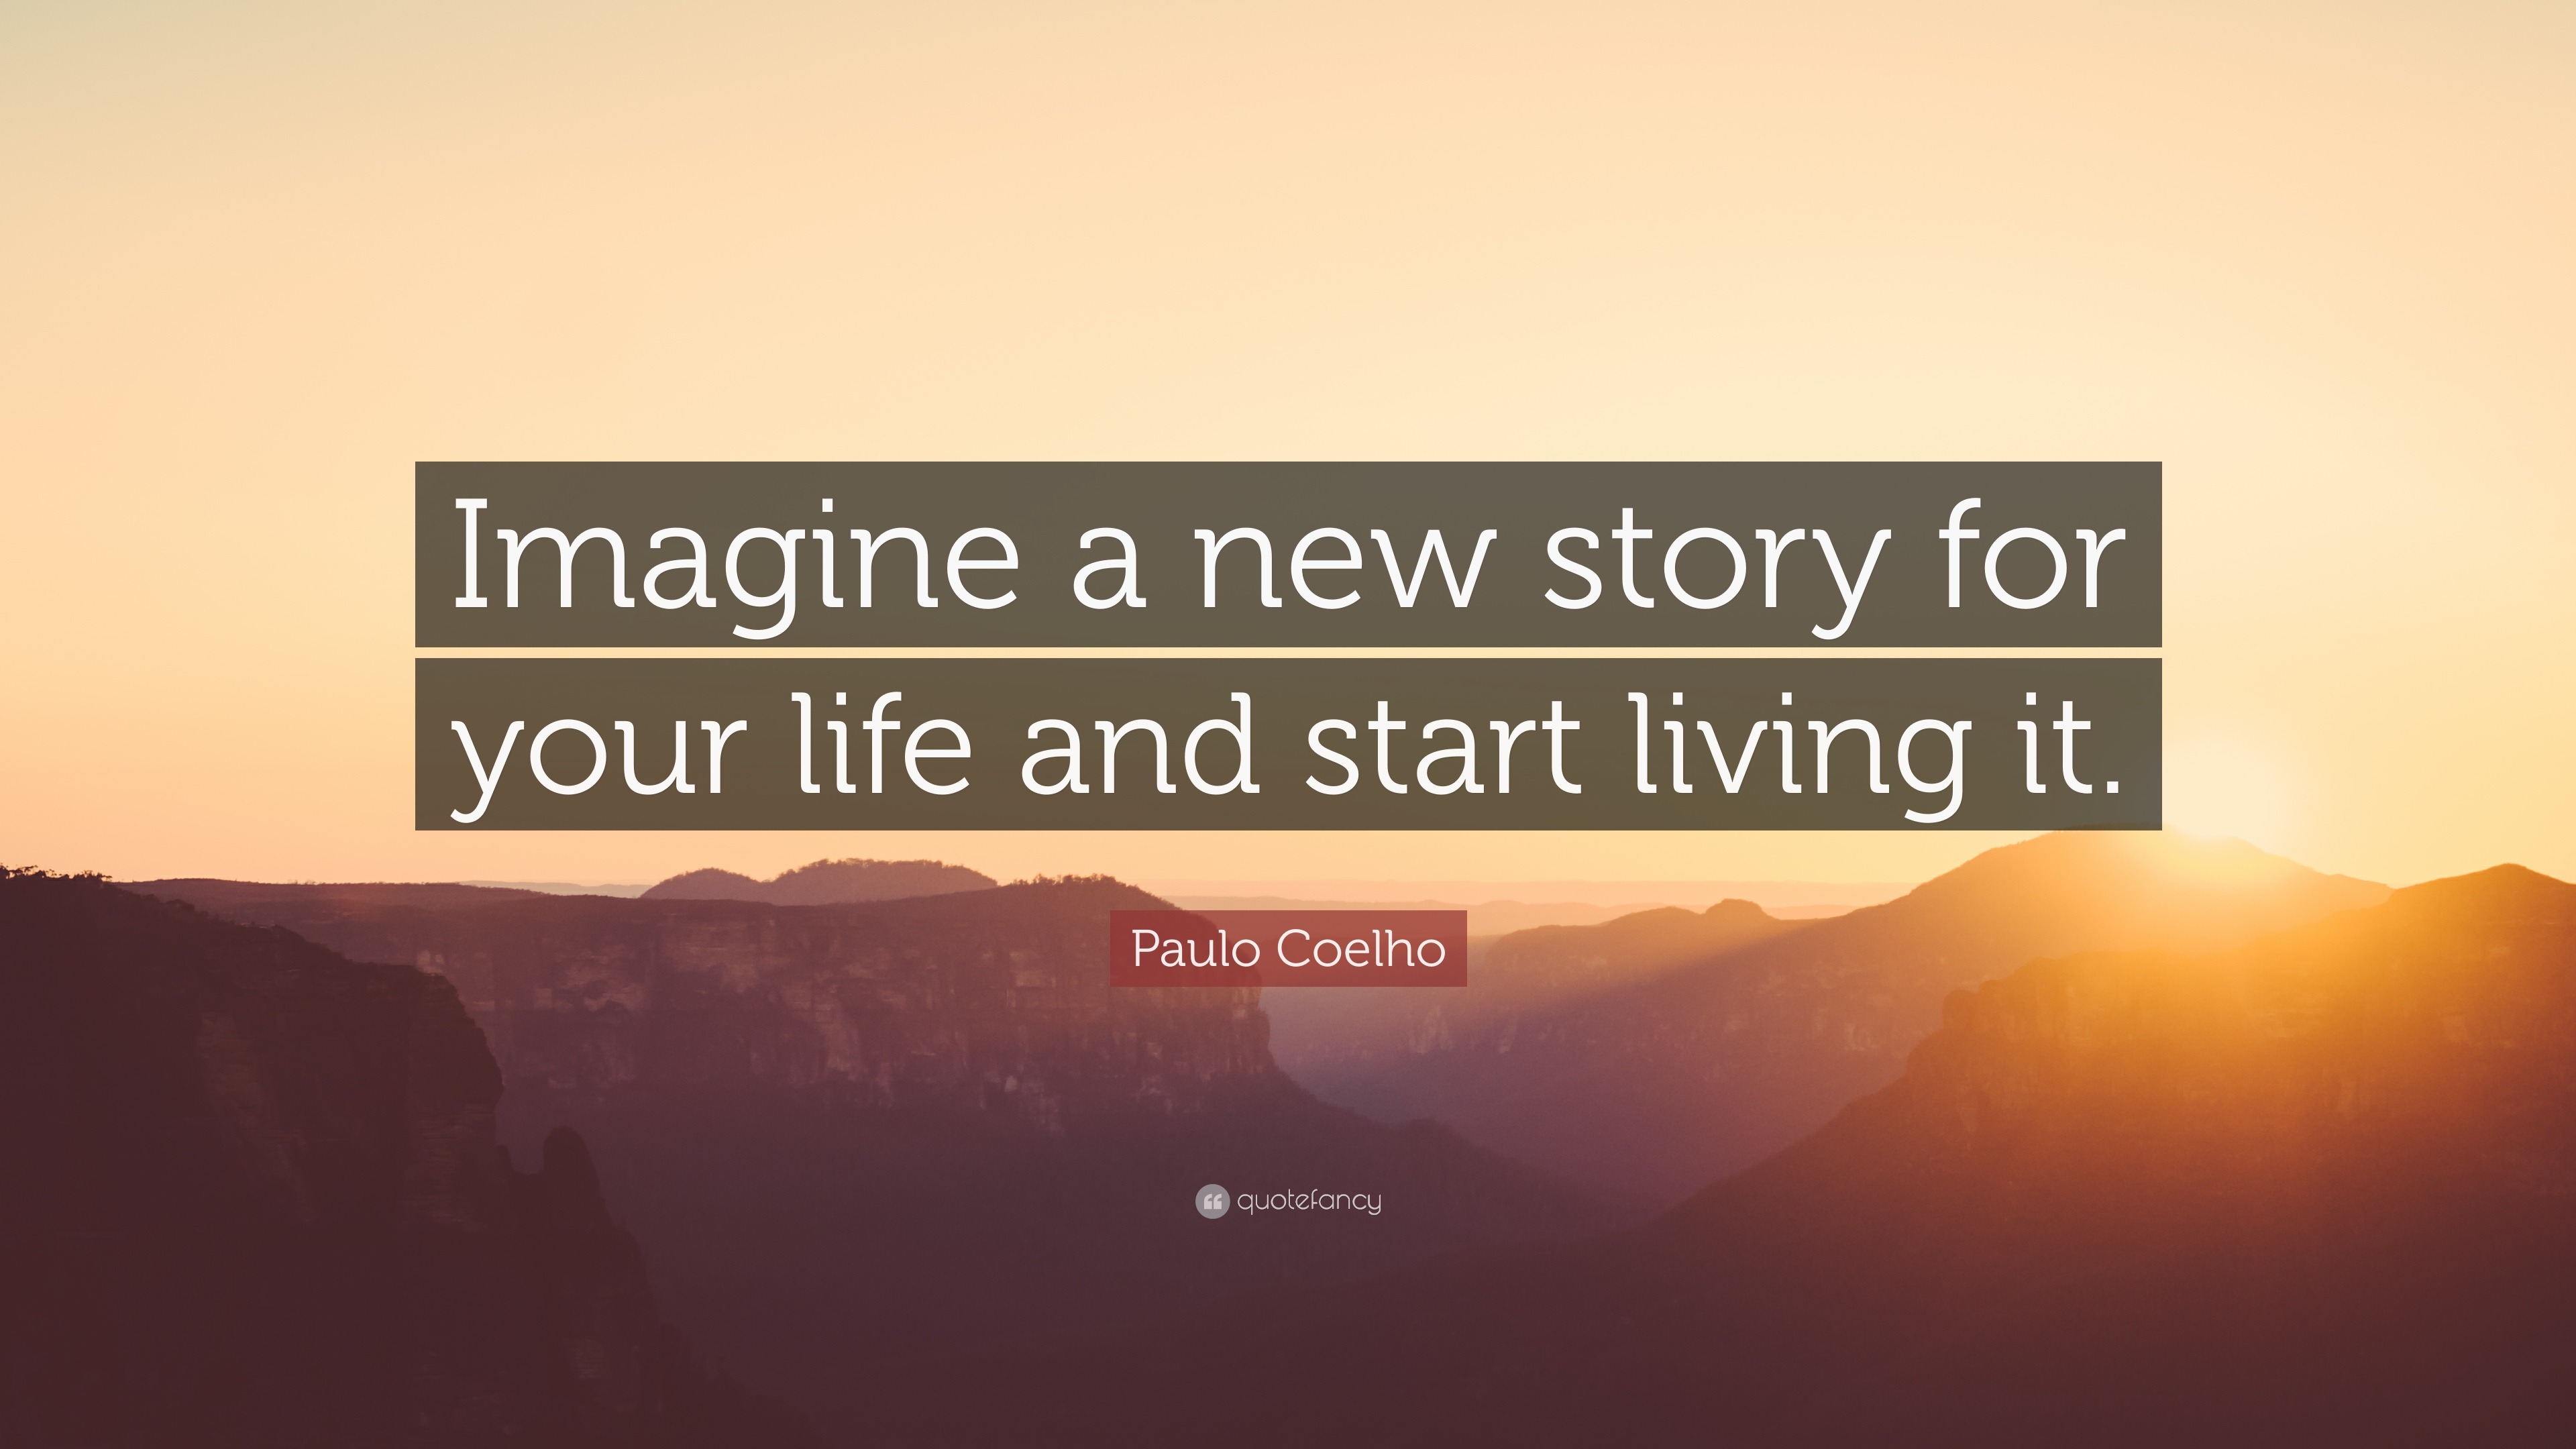 Paulo Coelho Quote “Imagine a new story for your life and start living it